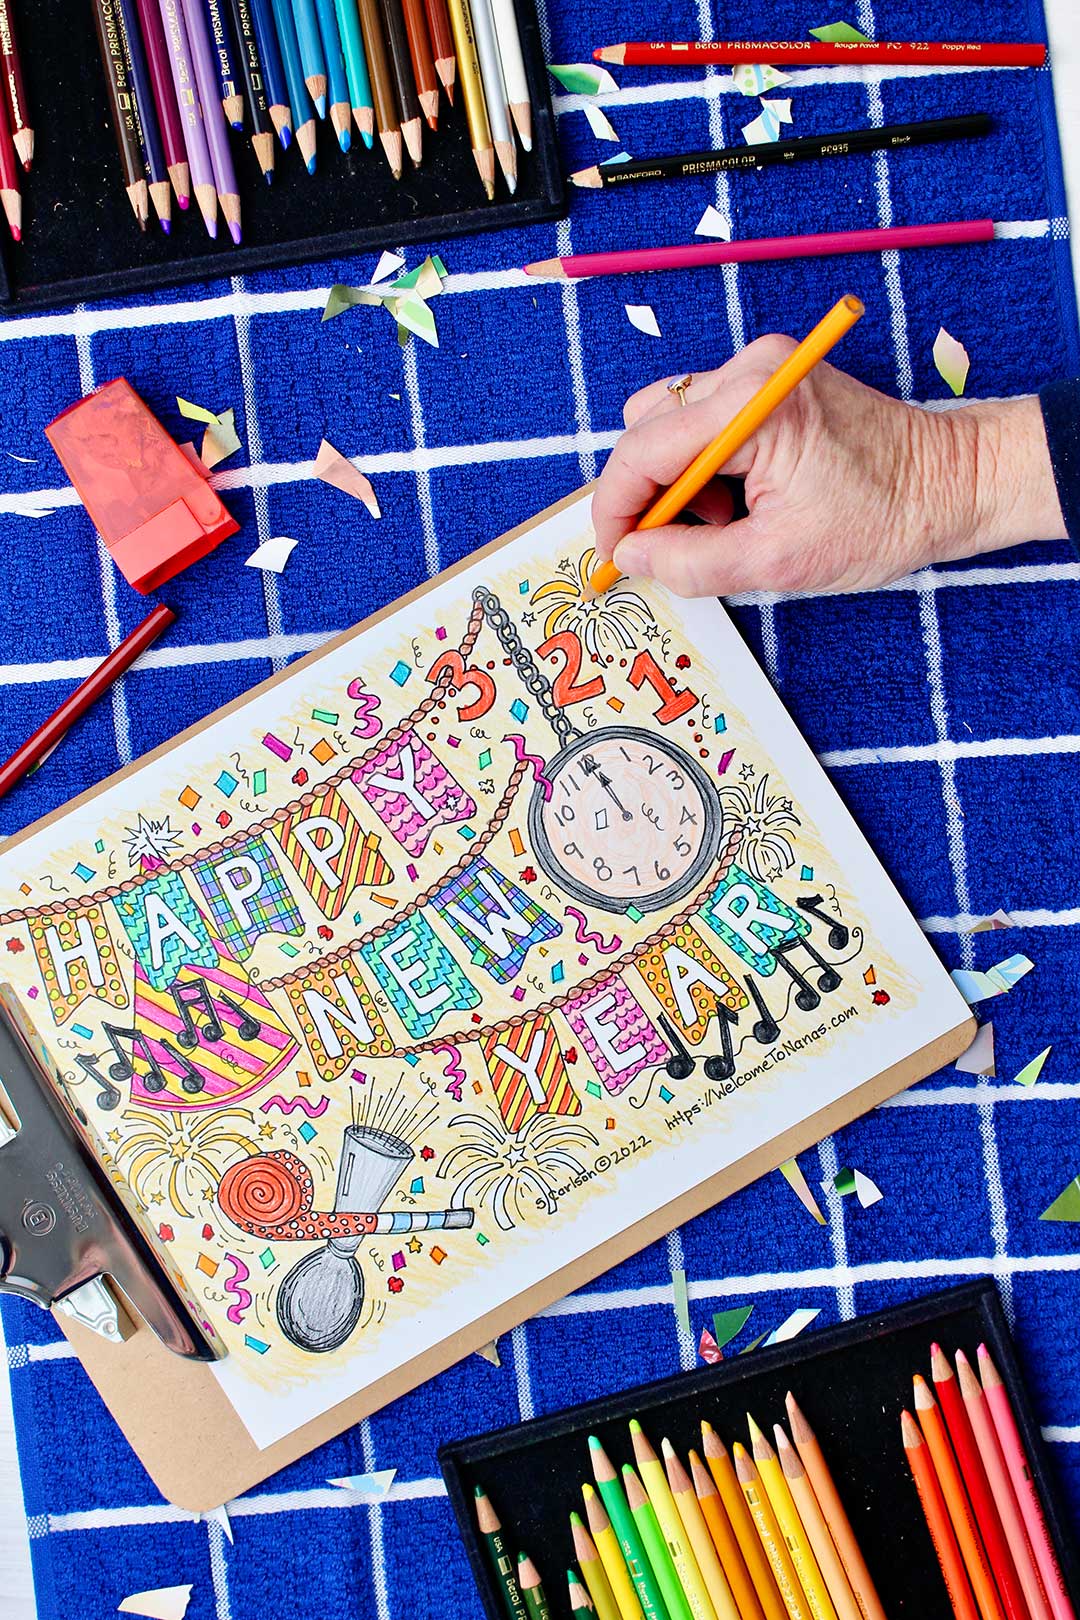 Hand coloring a firework yellow-orange on the New Year's Coloring Page.